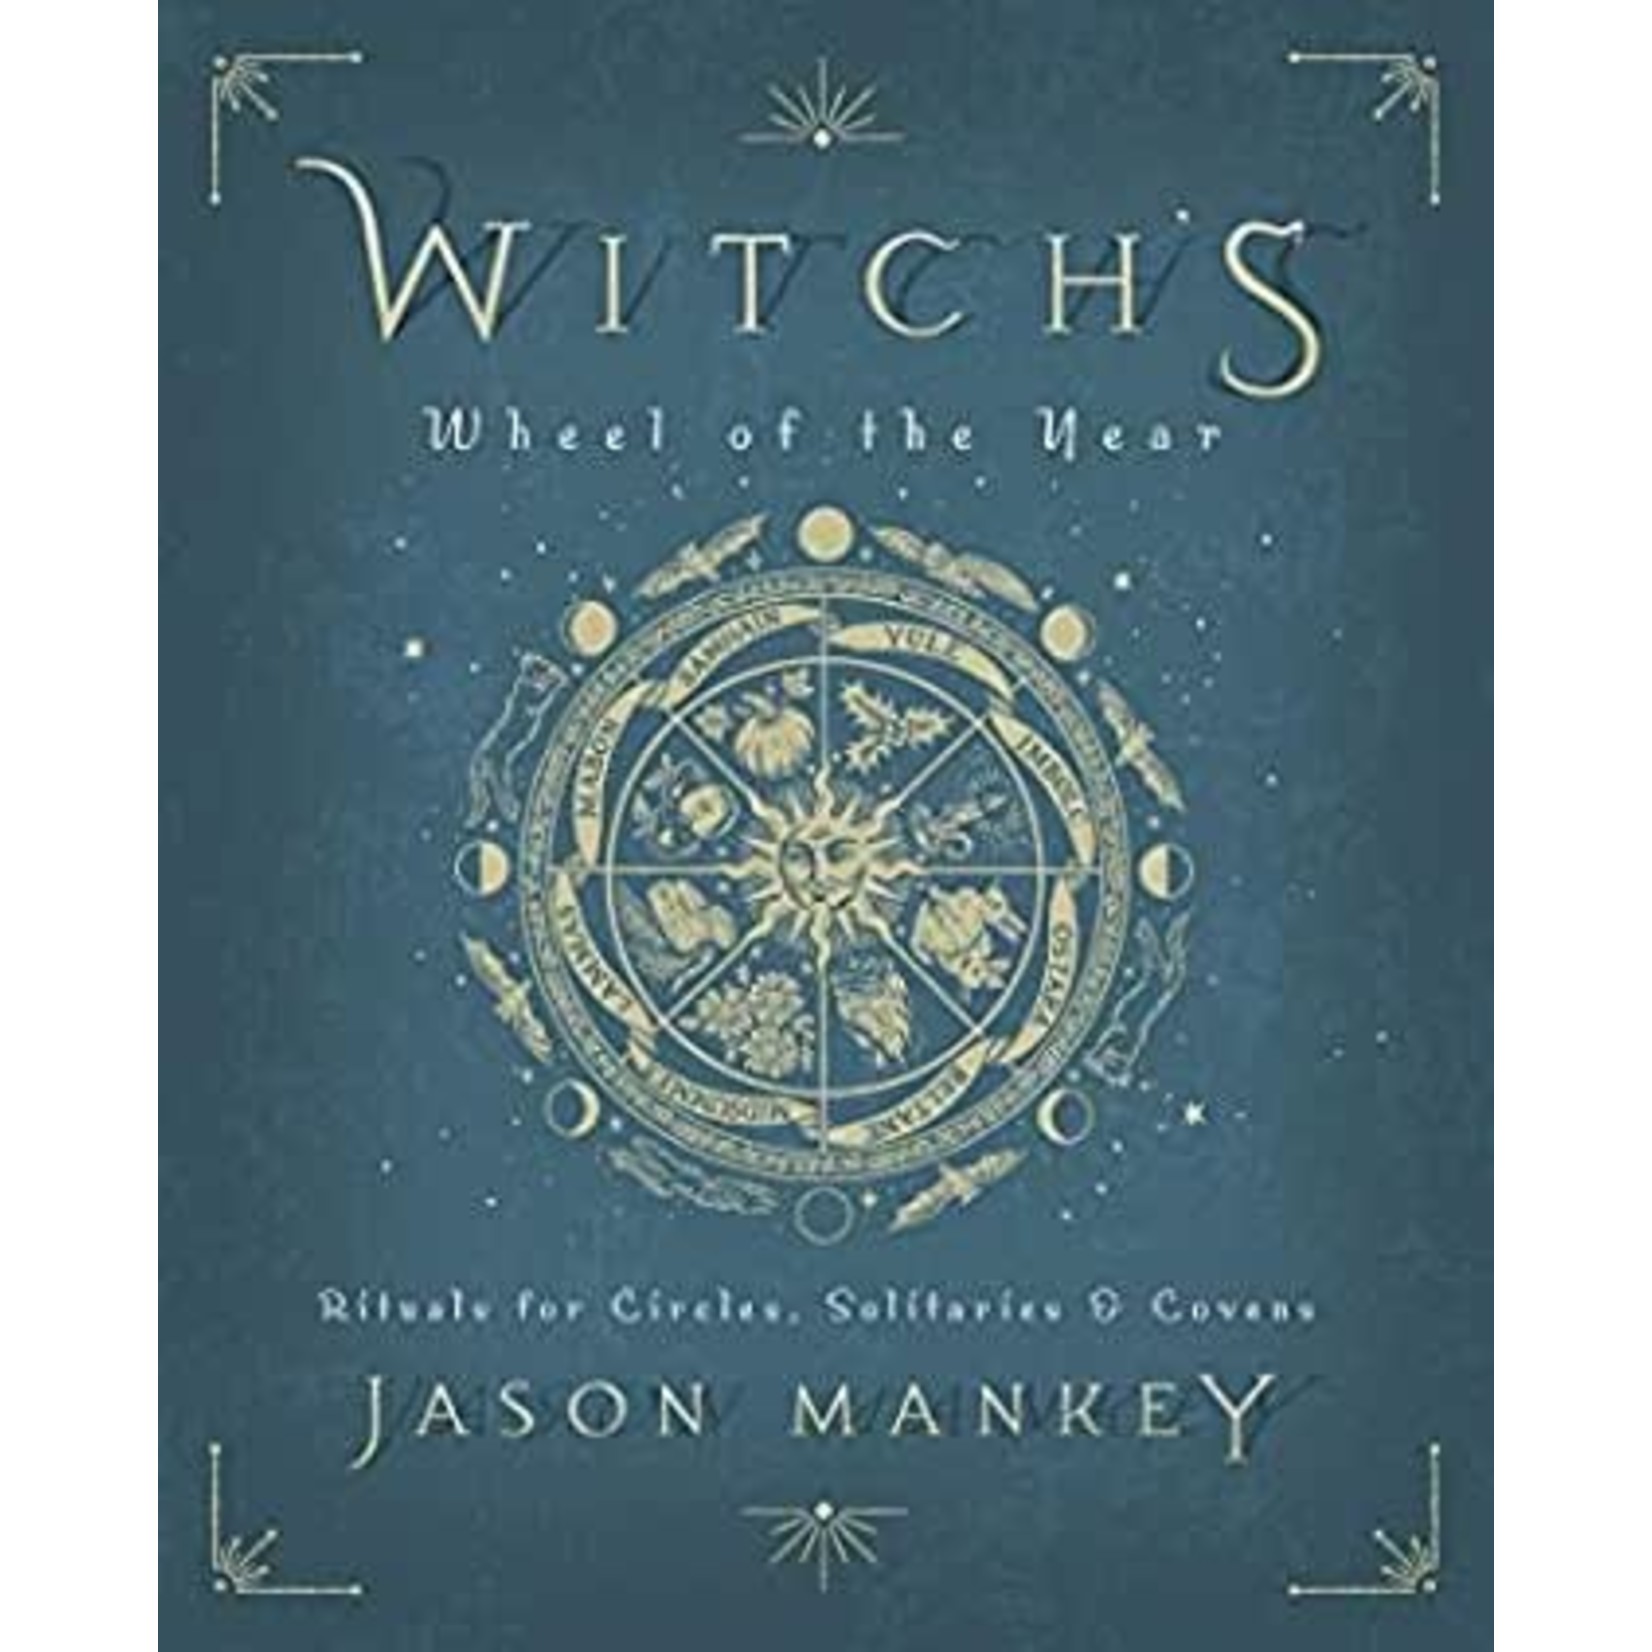 The Witch's Wheel of the Year by Jason Mankey